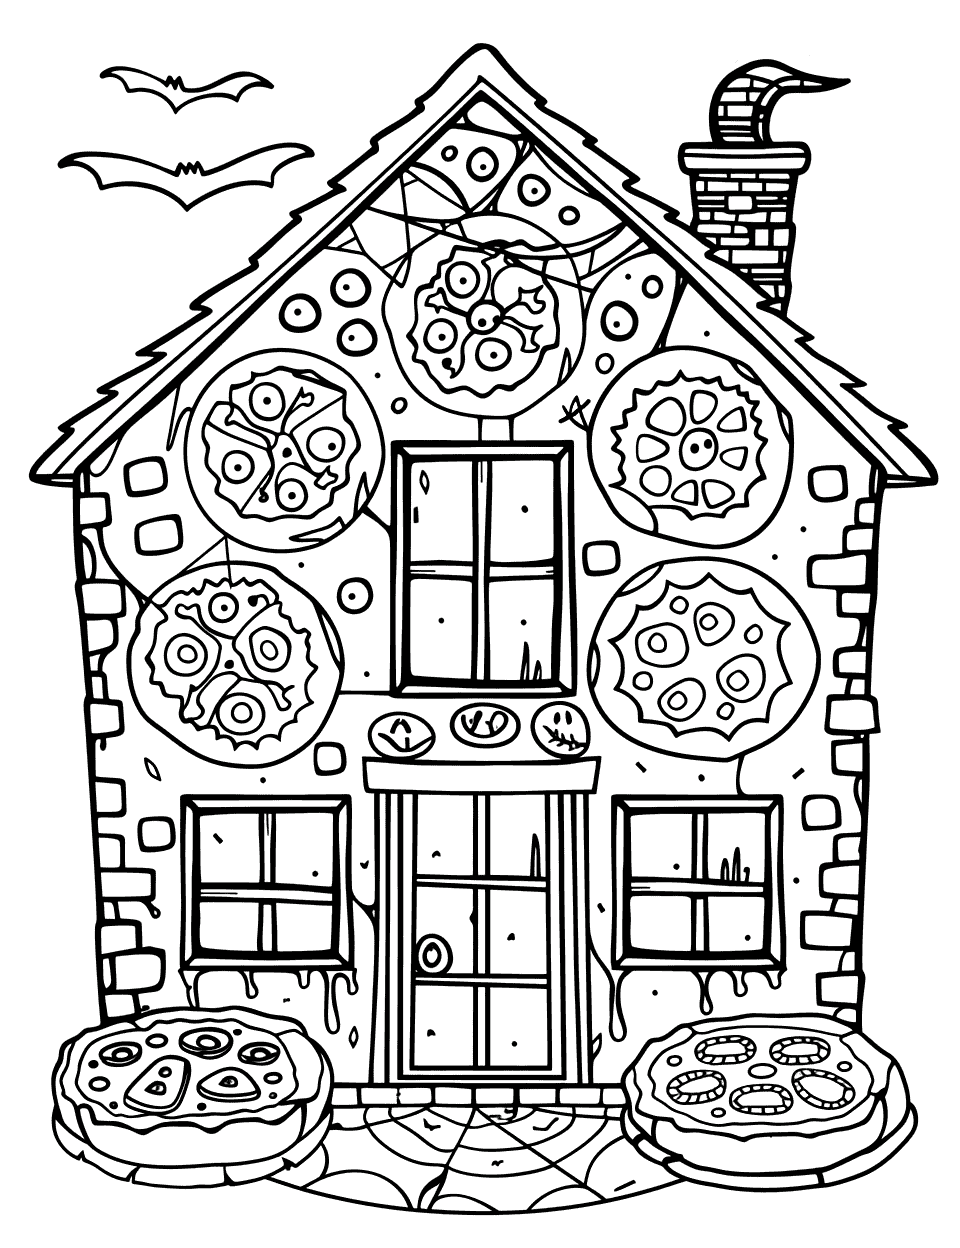 Haunted Pizza House Coloring Page - A haunted house scene with pizza-themed decorations like cheese cobwebs.